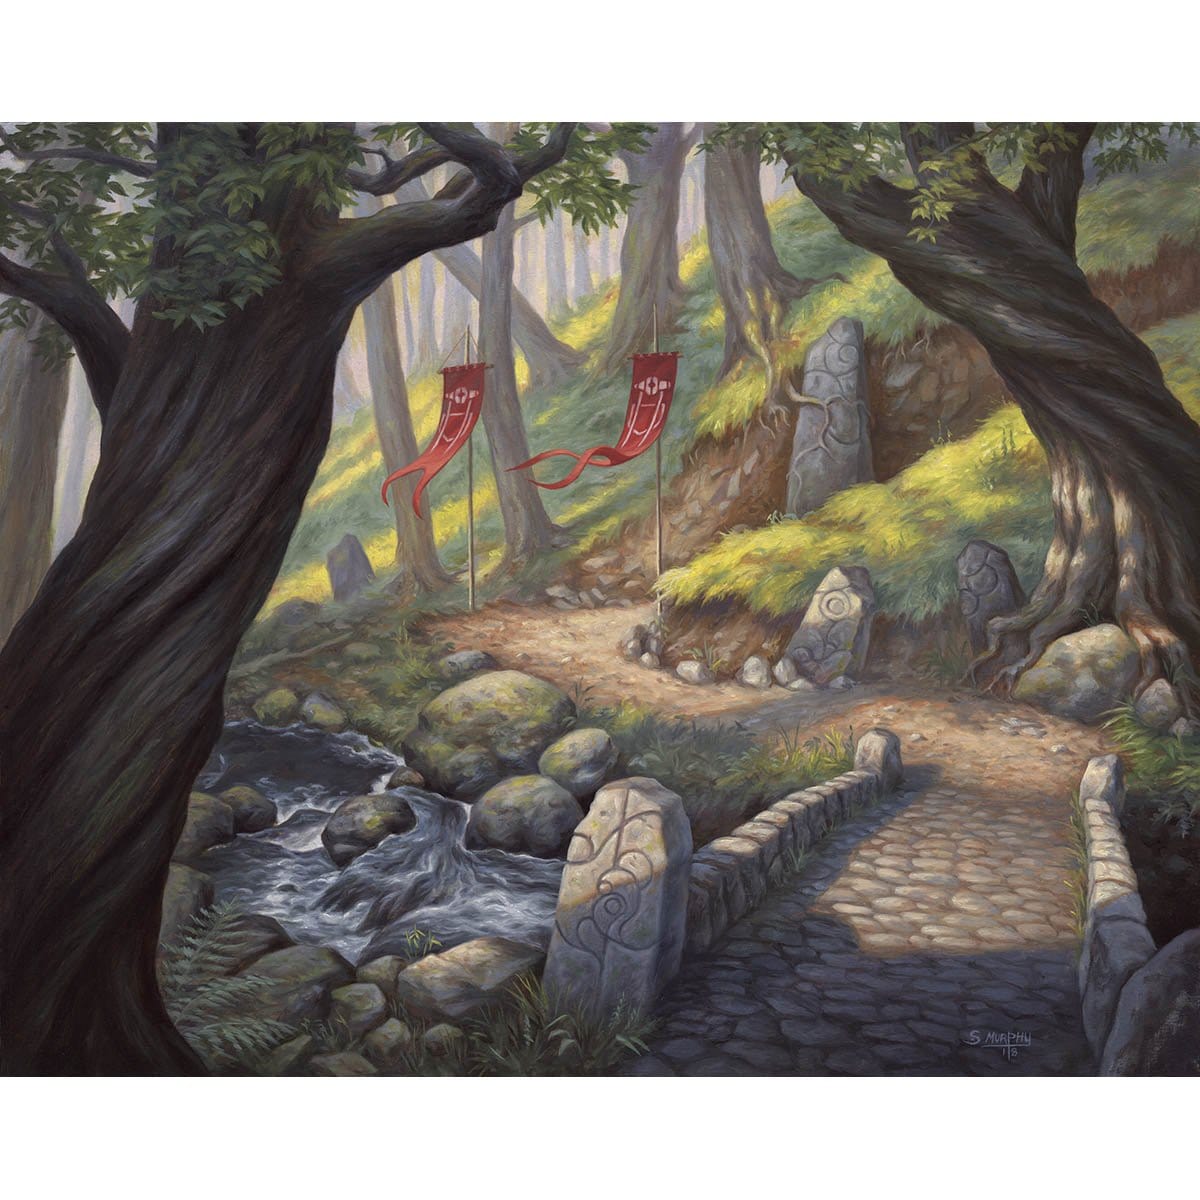 Forest (Throne of Eldraine) Print - Print - Original Magic Art - Accessories for Magic the Gathering and other card games